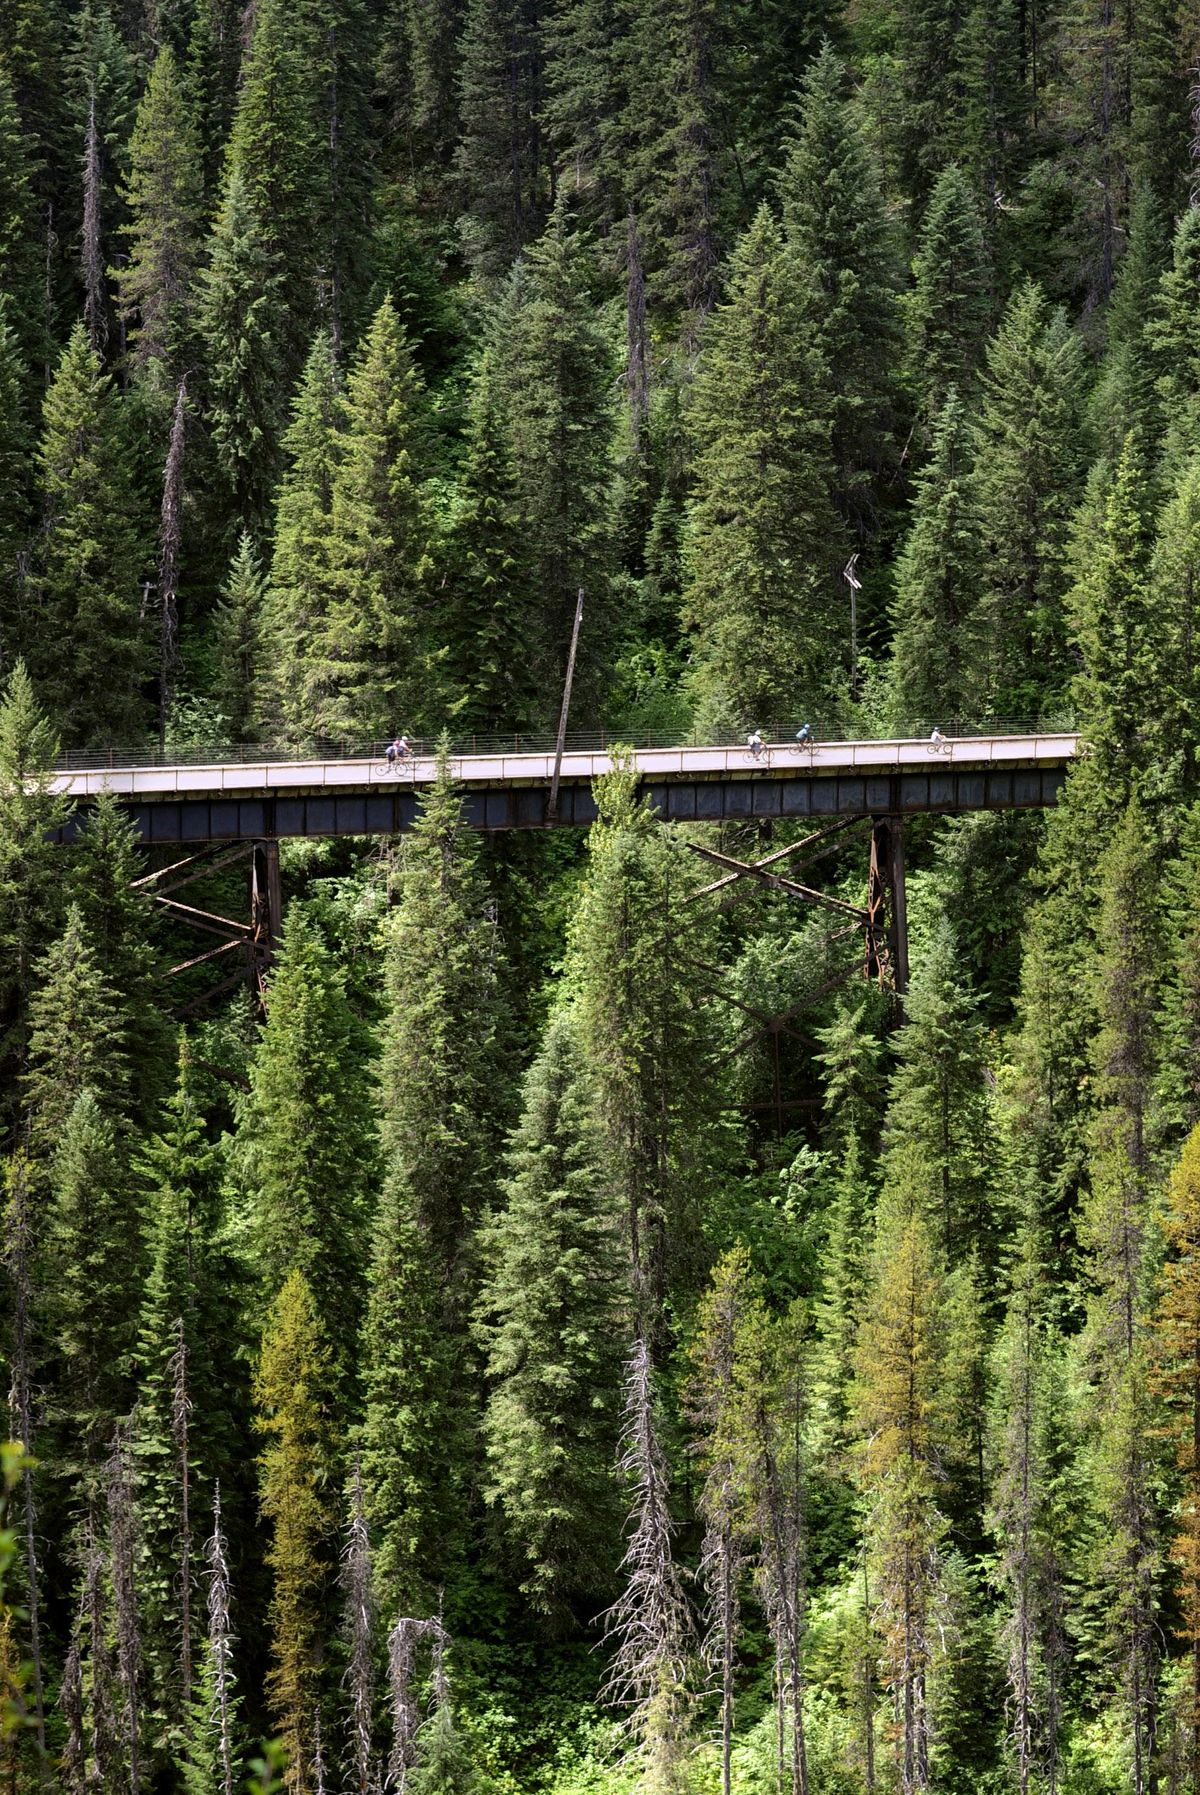 Bike riders move through the treetops as they cross a trestle on the Trail of the Hiawathas along the Idaho and Montana border. The popular ride takes you through the middle of the 1910 fire burn area. As the forests burned evacuation trains loaded with people trying to escape had to move between trestles and tunnels trying to find shelter from the heat and flames. (The Spokesman-Review / File)